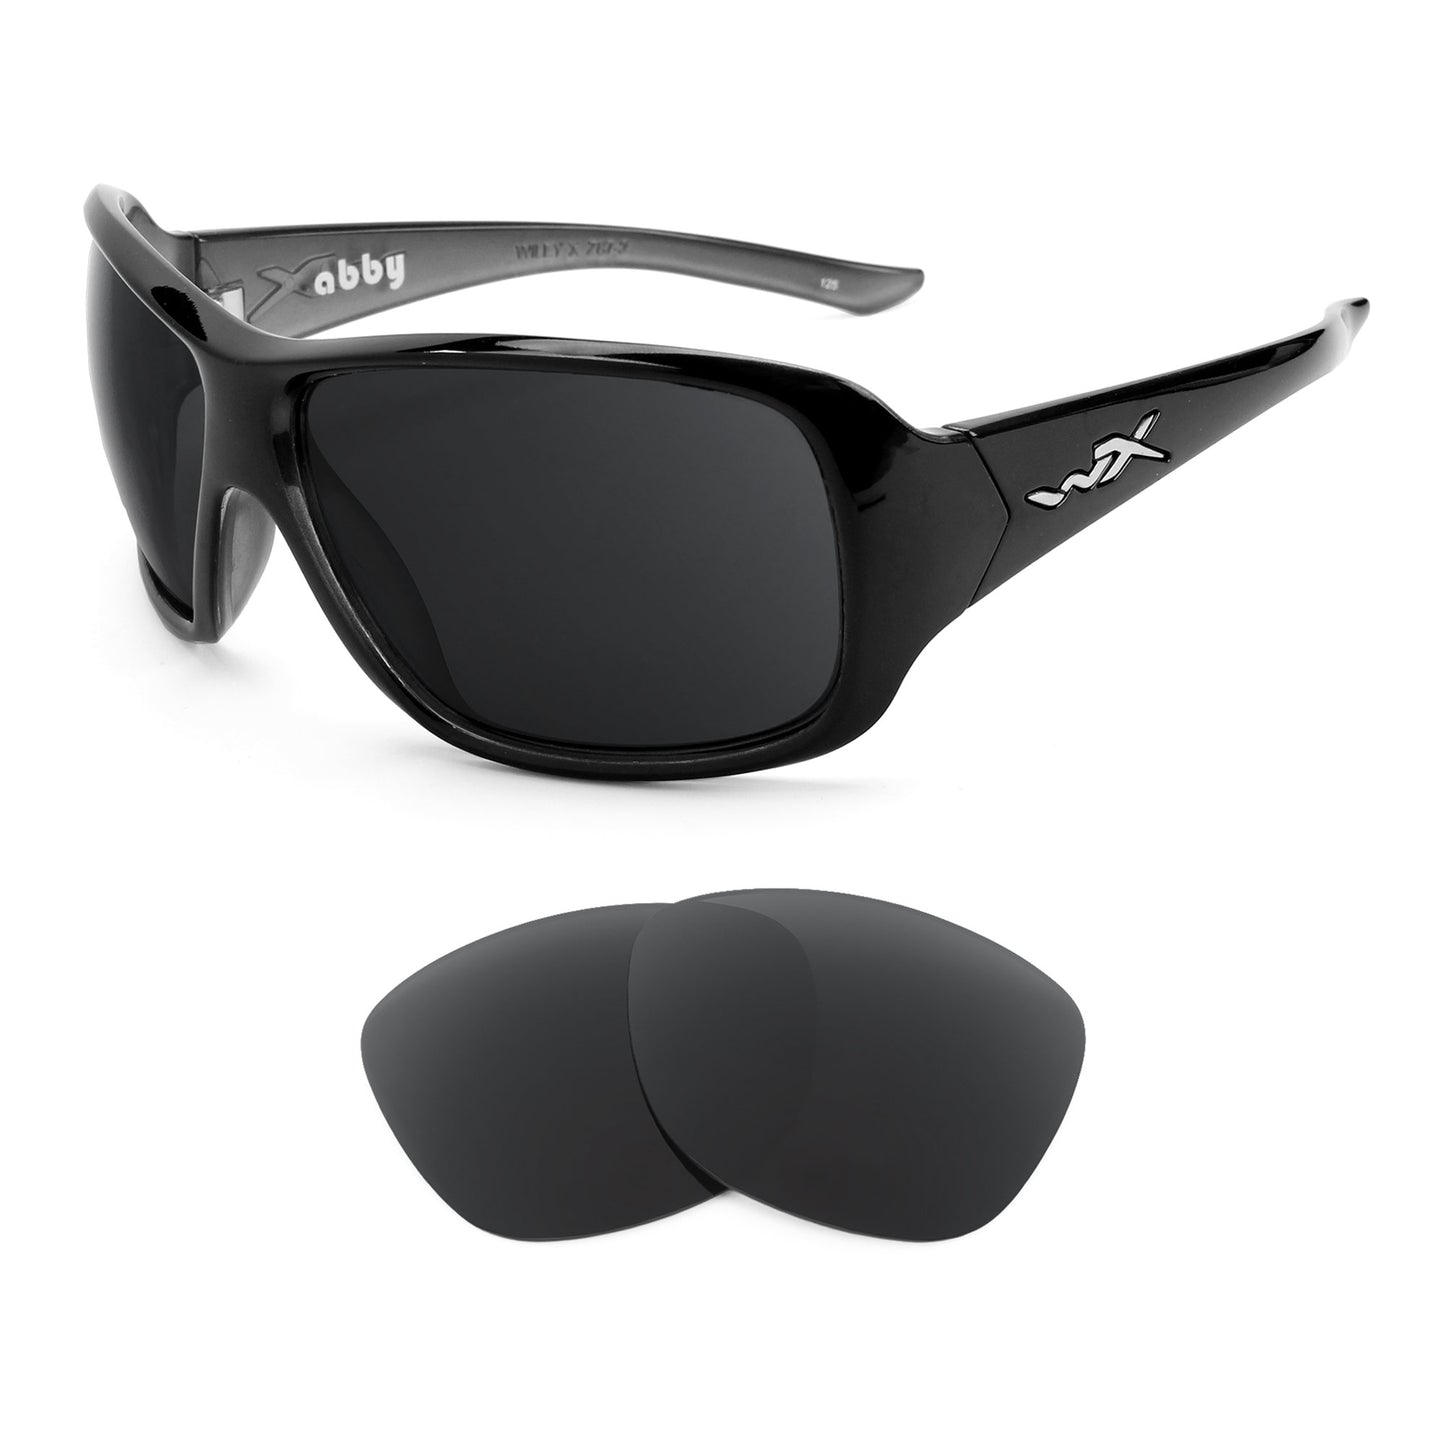 Wiley X Abby sunglasses with replacement lenses